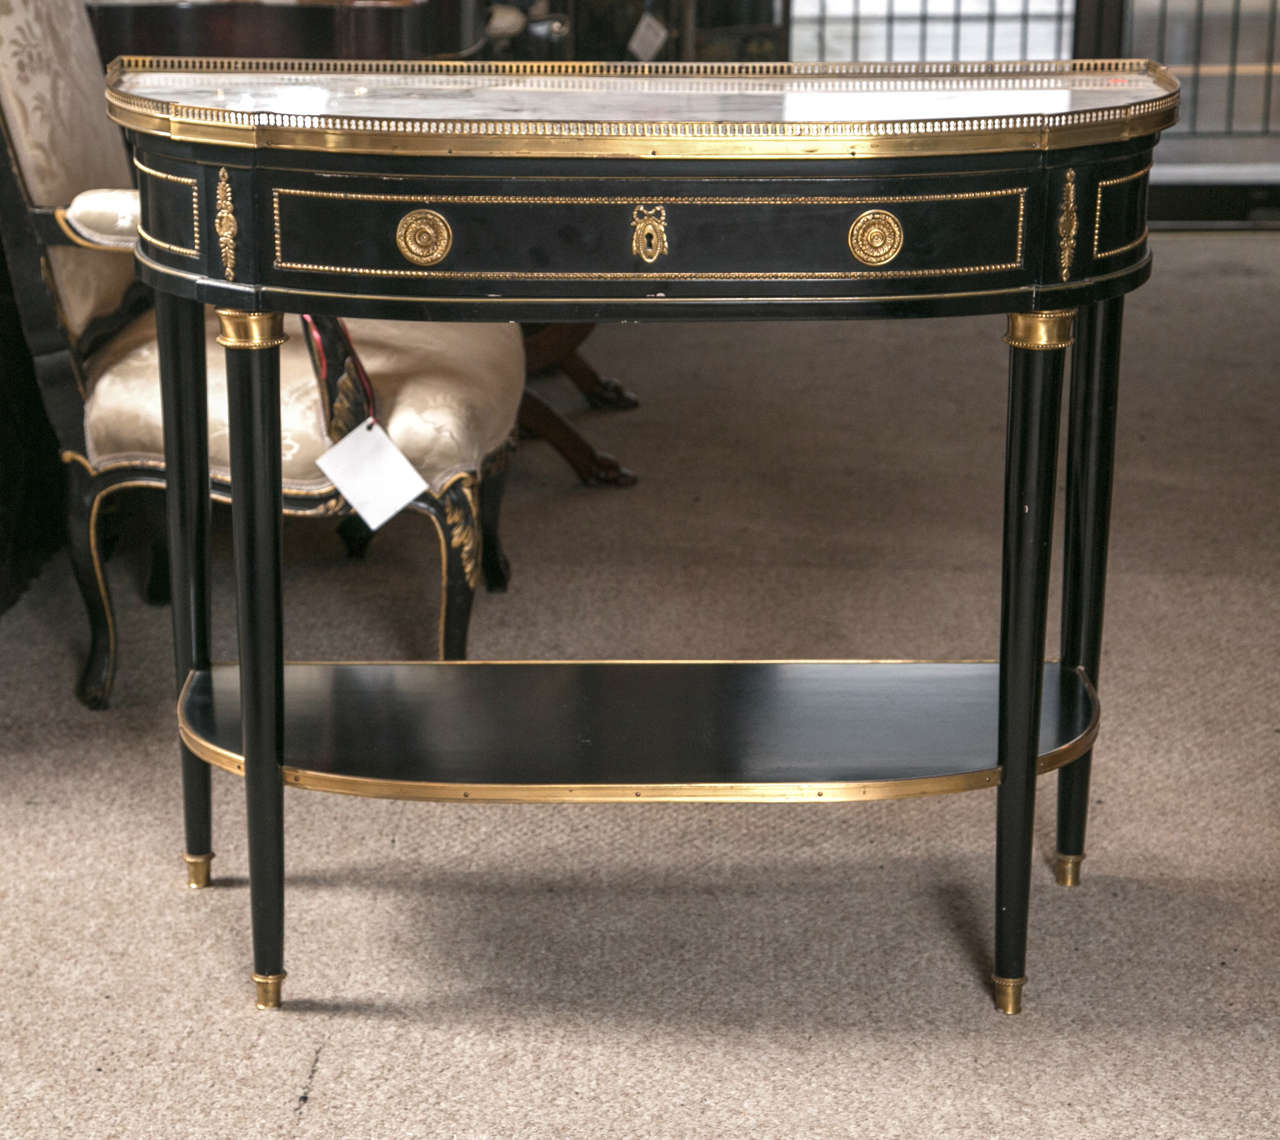 Maison Jansen demilune console table. This fabulous Louis XVI inspired demilune console is one of the older pieces by this renowned designer we have had to offer in quite some time. The all-over bronze mounts of fine casting and gilt quality.